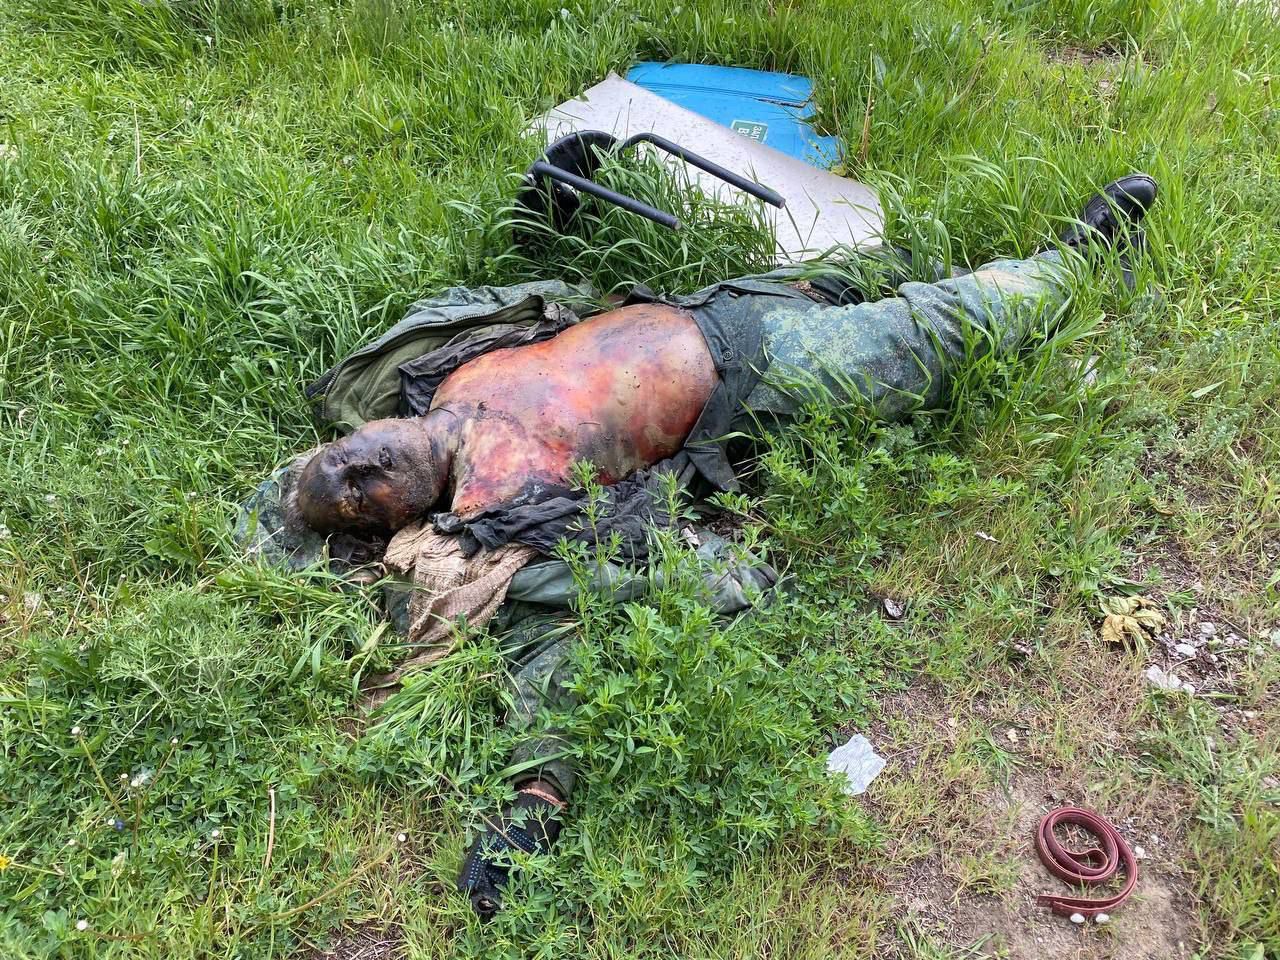 Slightly bloated corpse of a Russian military